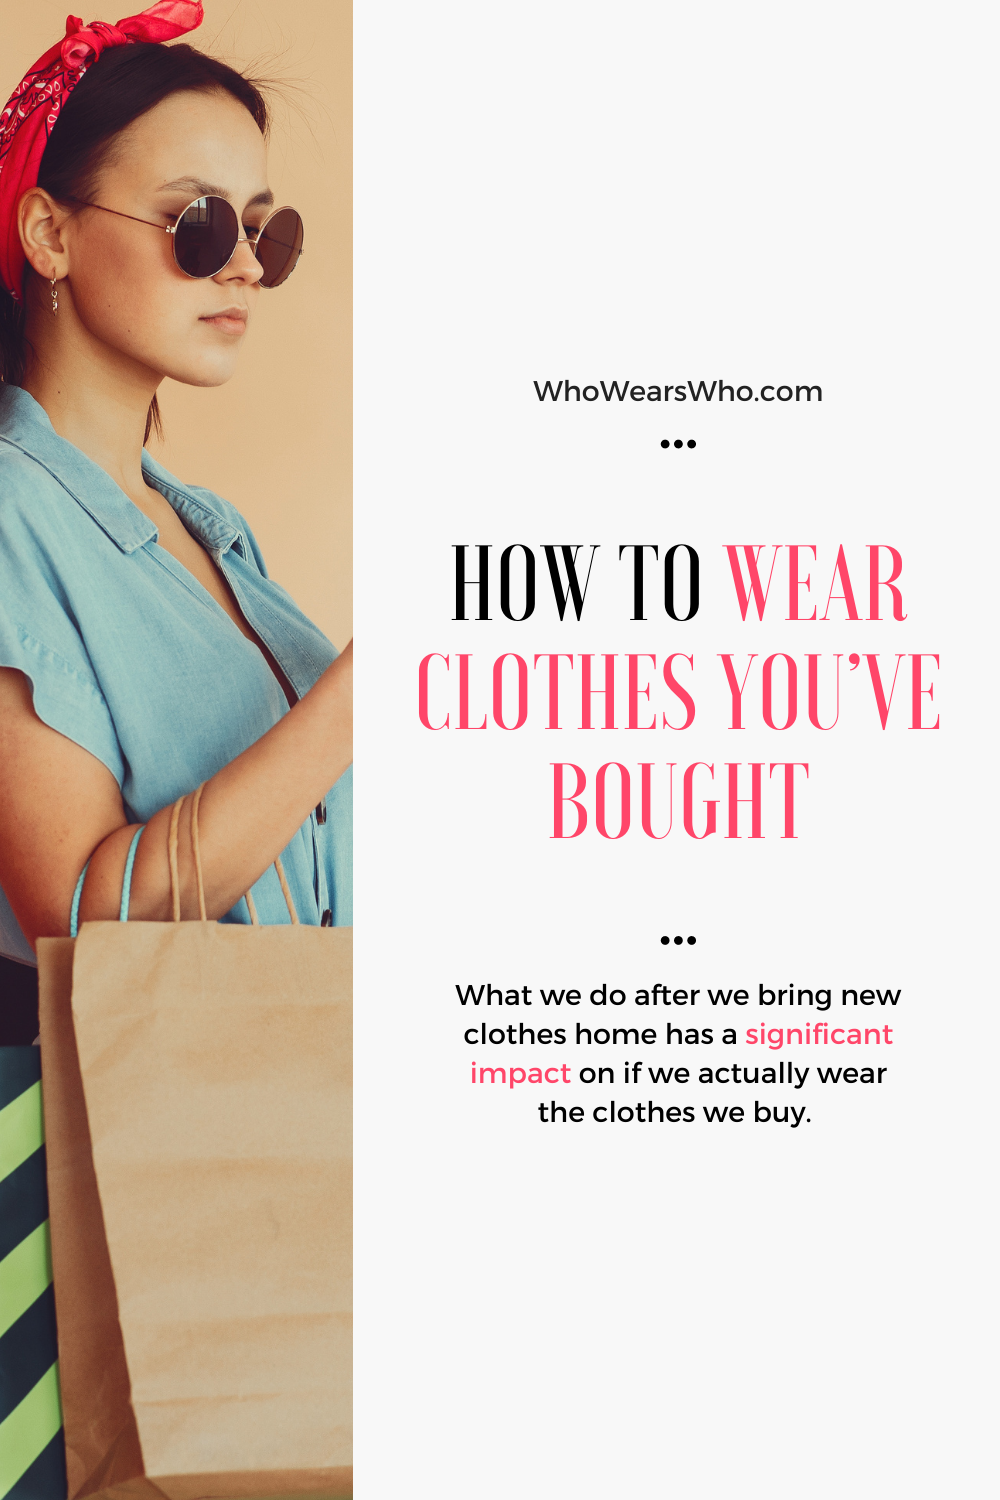 How to wear clothes you’ve bought